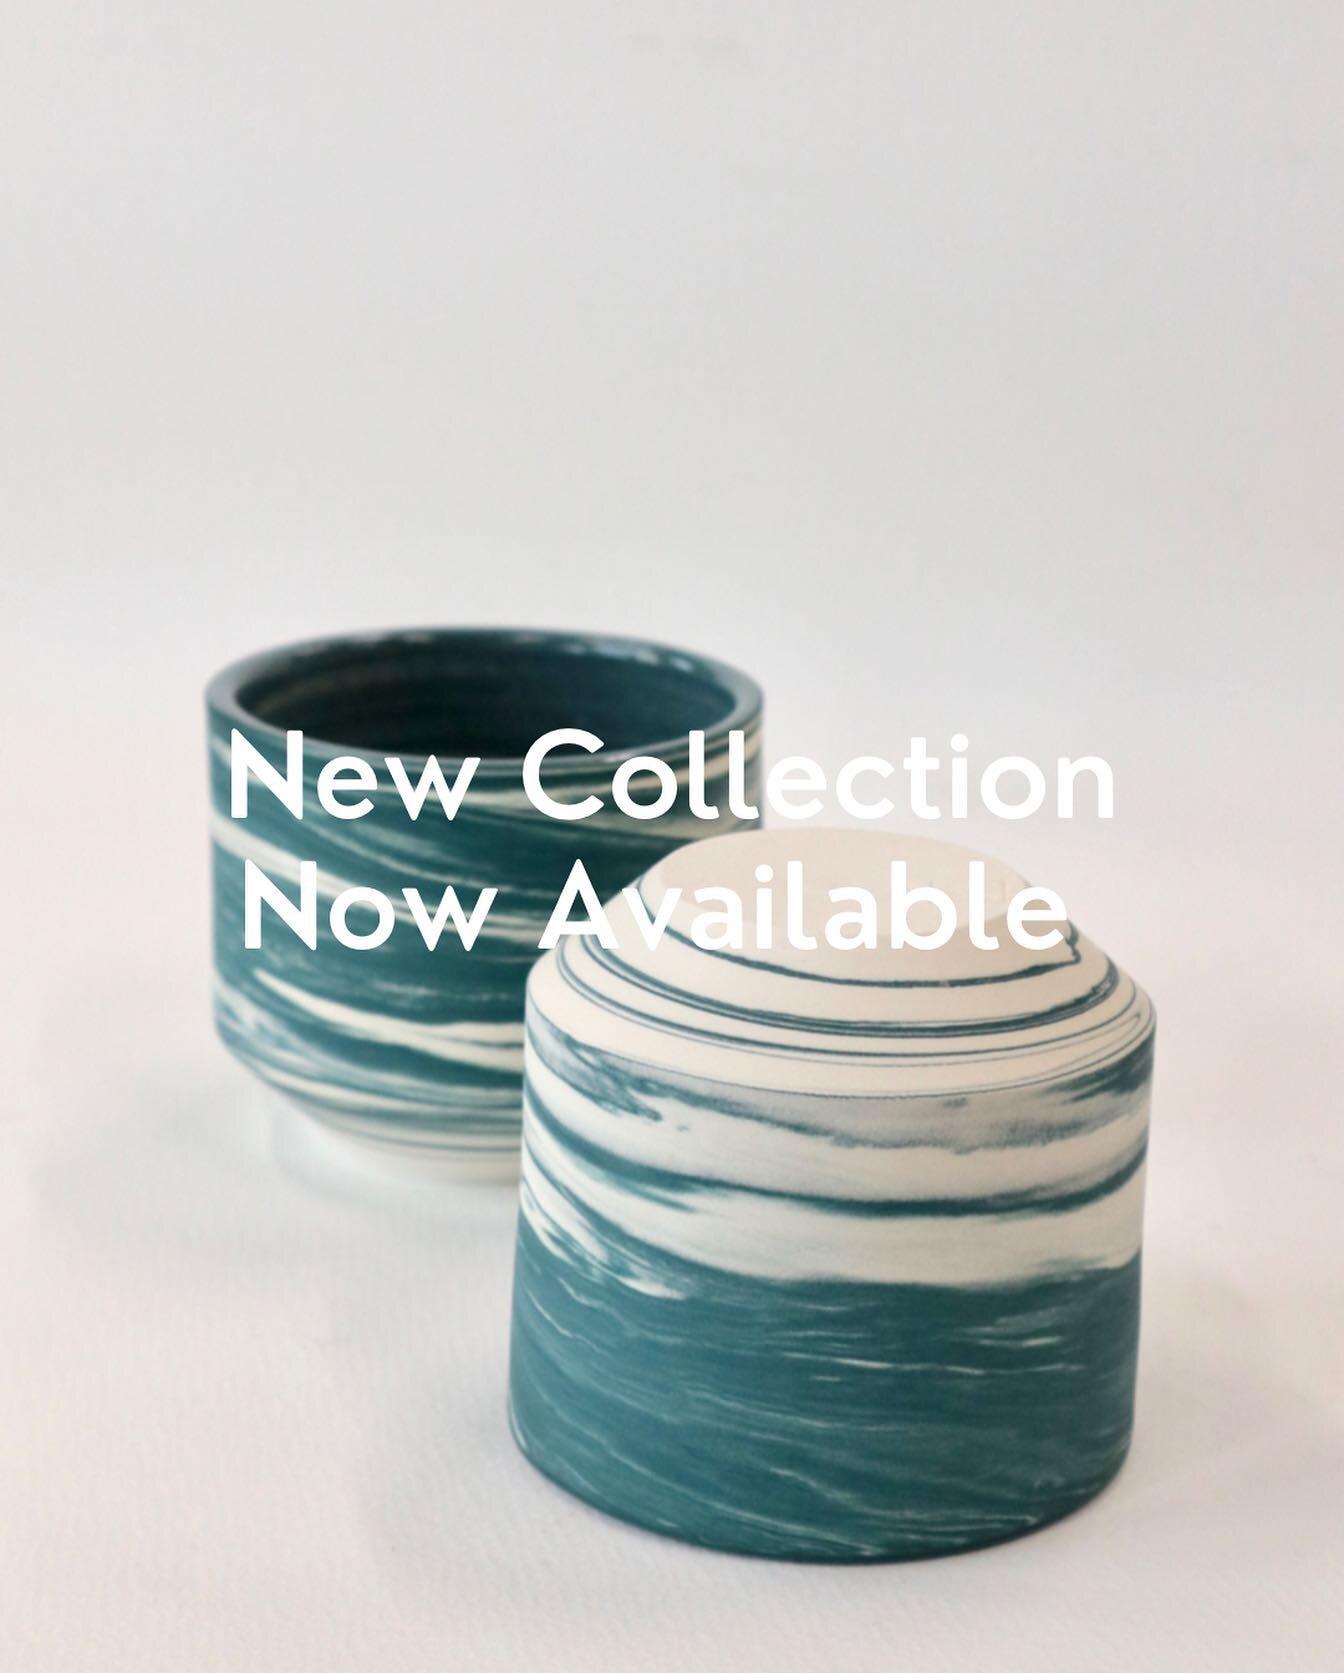 I have a new collection of unique marbled cups, available to buy at www.rawwares.co.uk
Made using a mixture of white and teal-stained stoneware clays, they each have a one-off pattern and each cup is unique in form too. They&rsquo;re glazed on the in